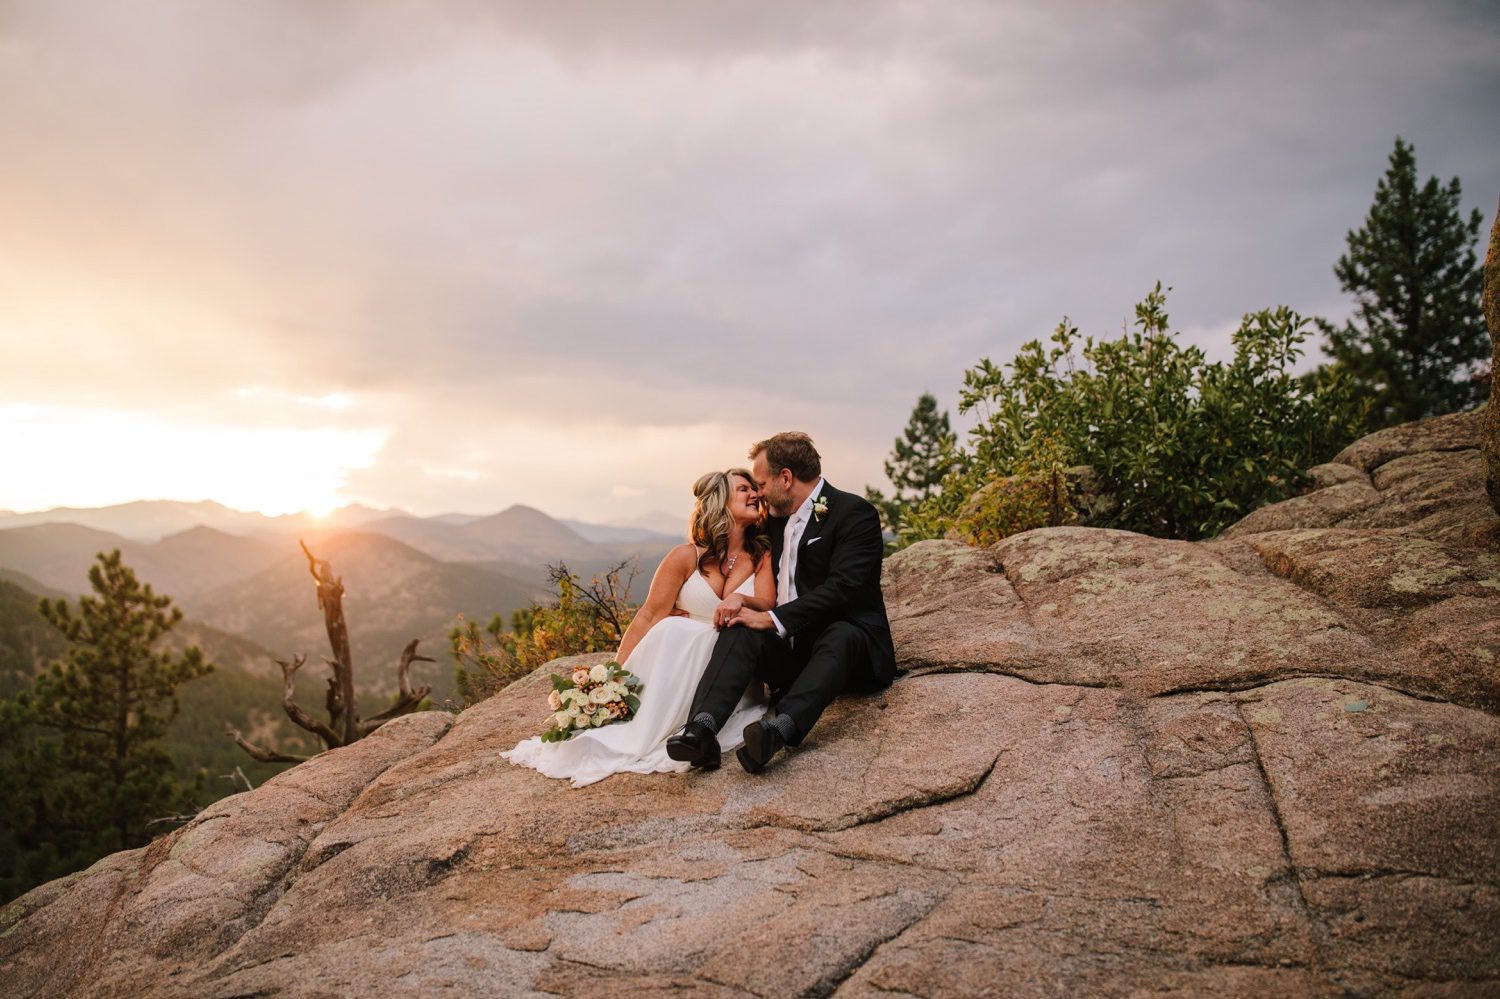 Bride and groom cuddling on mountain side at sunset